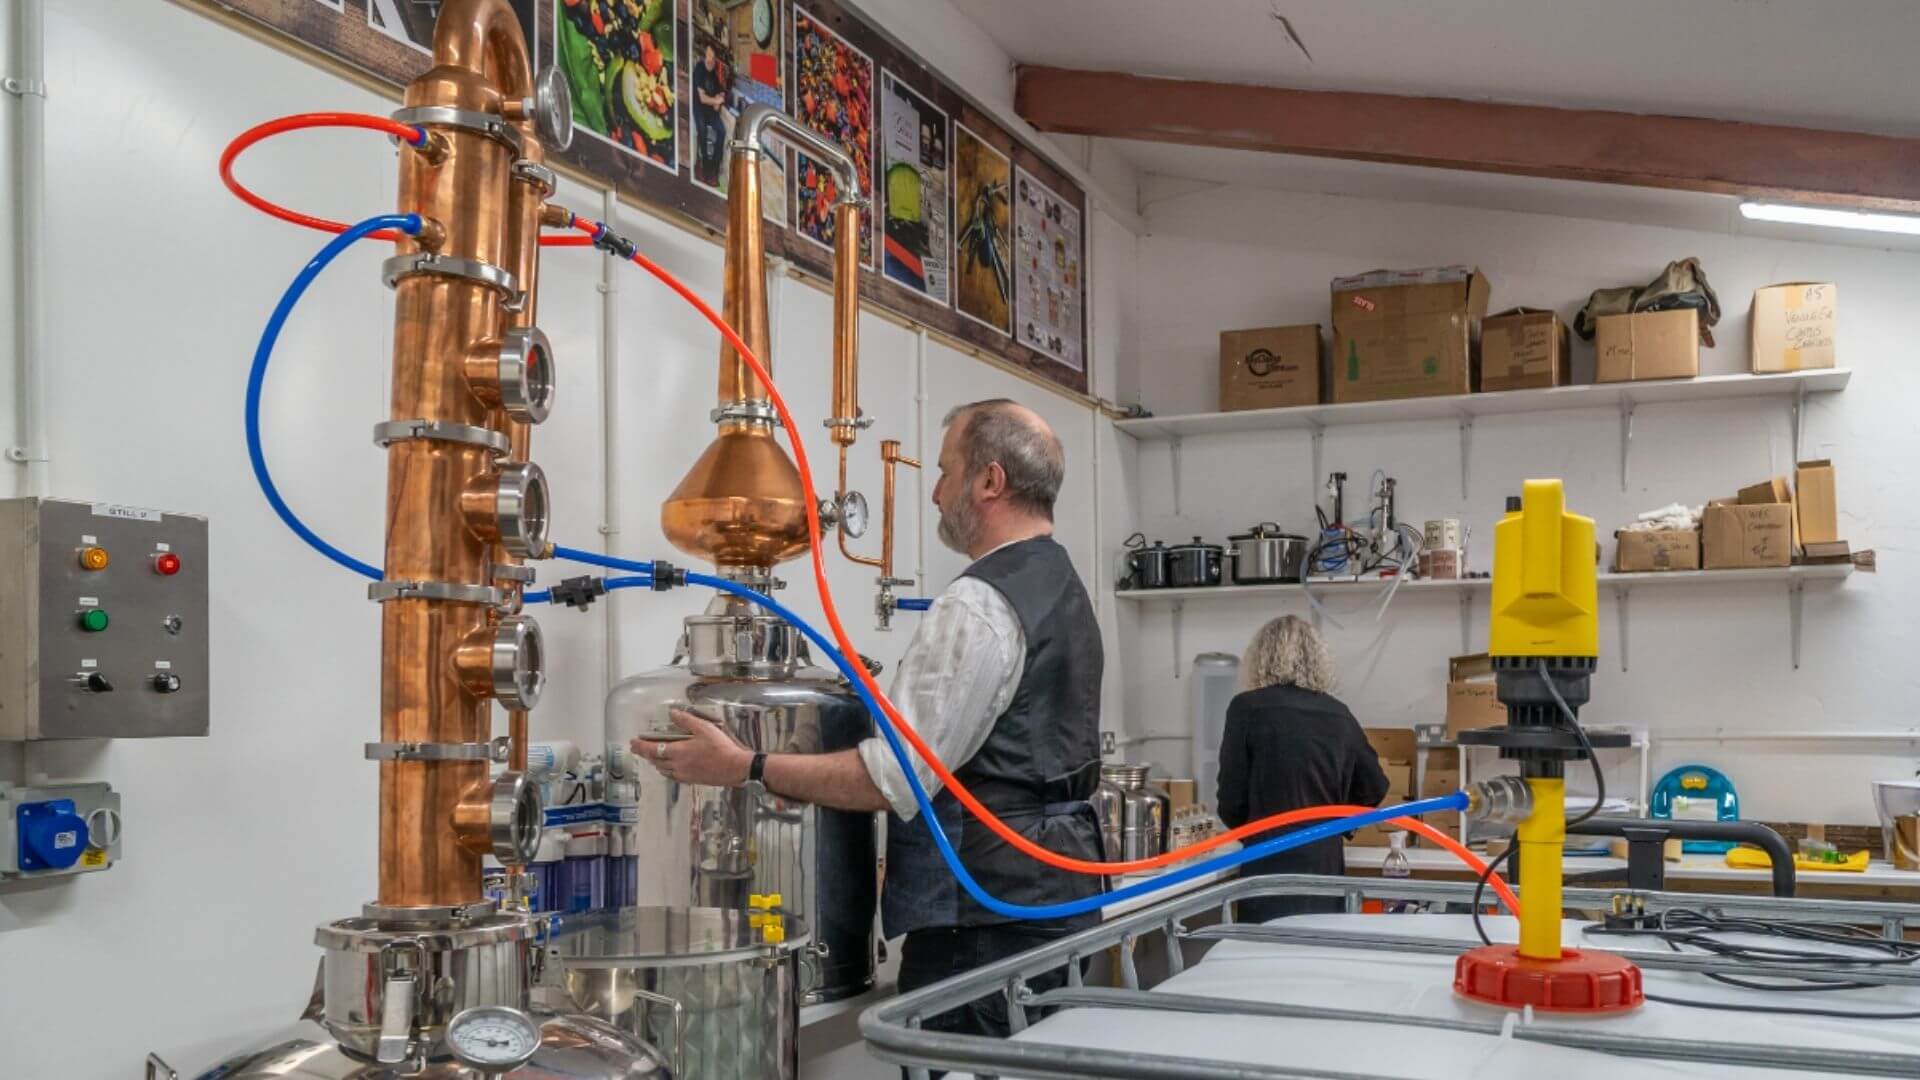 Andy and Zoe_Shed One Gin Distillery_Cumbria